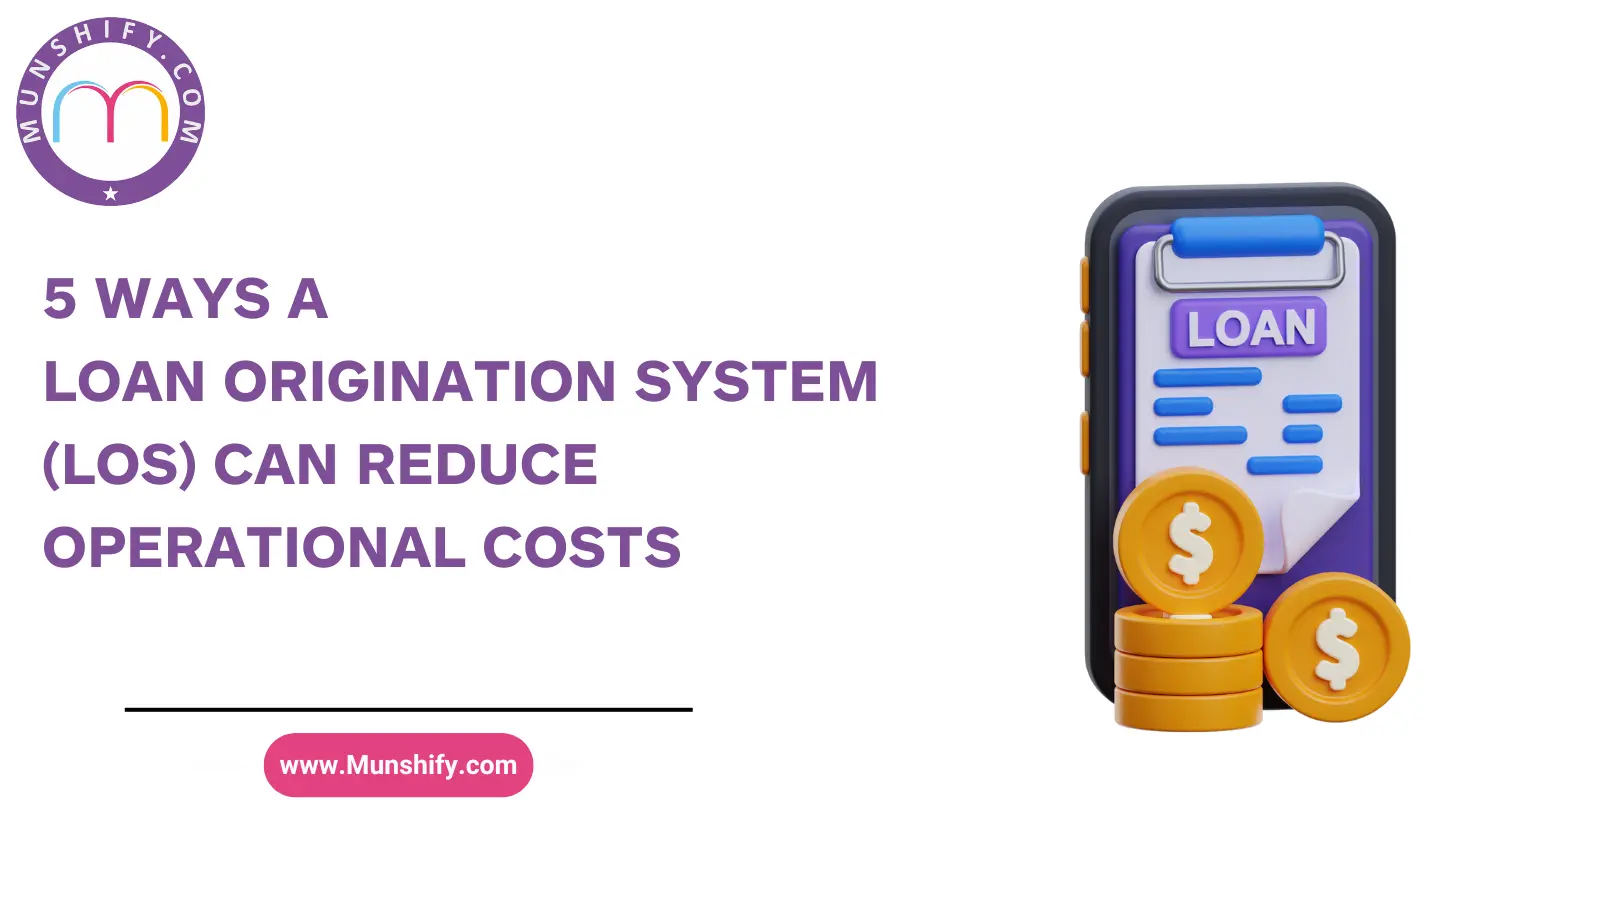 5 Ways a LOS Can Reduce Operational Costs